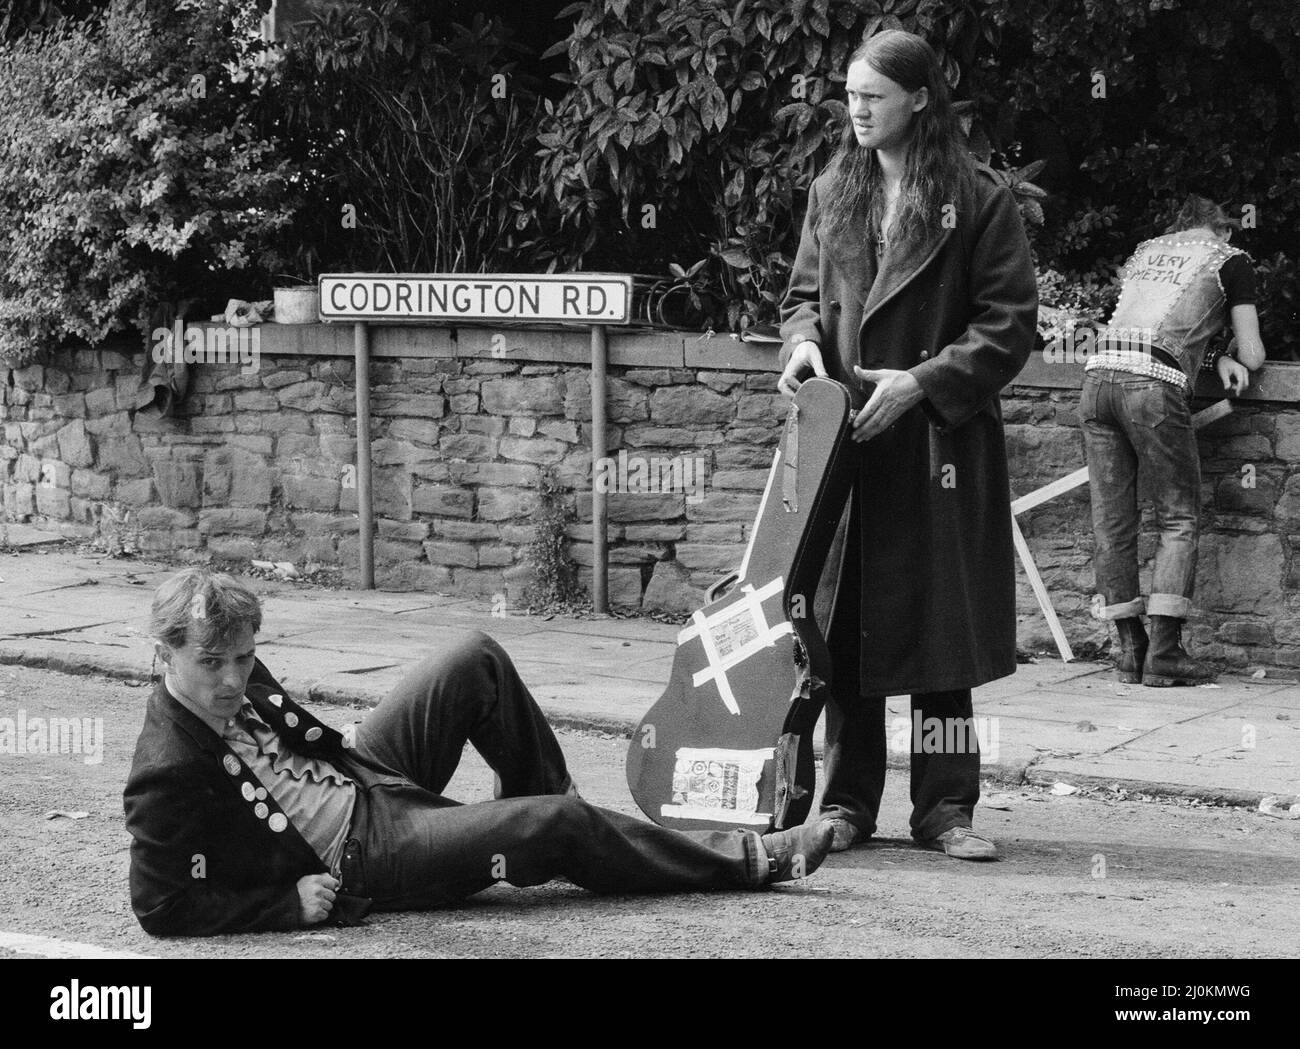 The cast of the Young Ones seen here filming on location at Codrington Road, Bristol. Left to Right Rik Mayall as Rick, Nigel Planer as Neil and Adrian Edmondson as Vyvyan. August 1982. Stock Photo